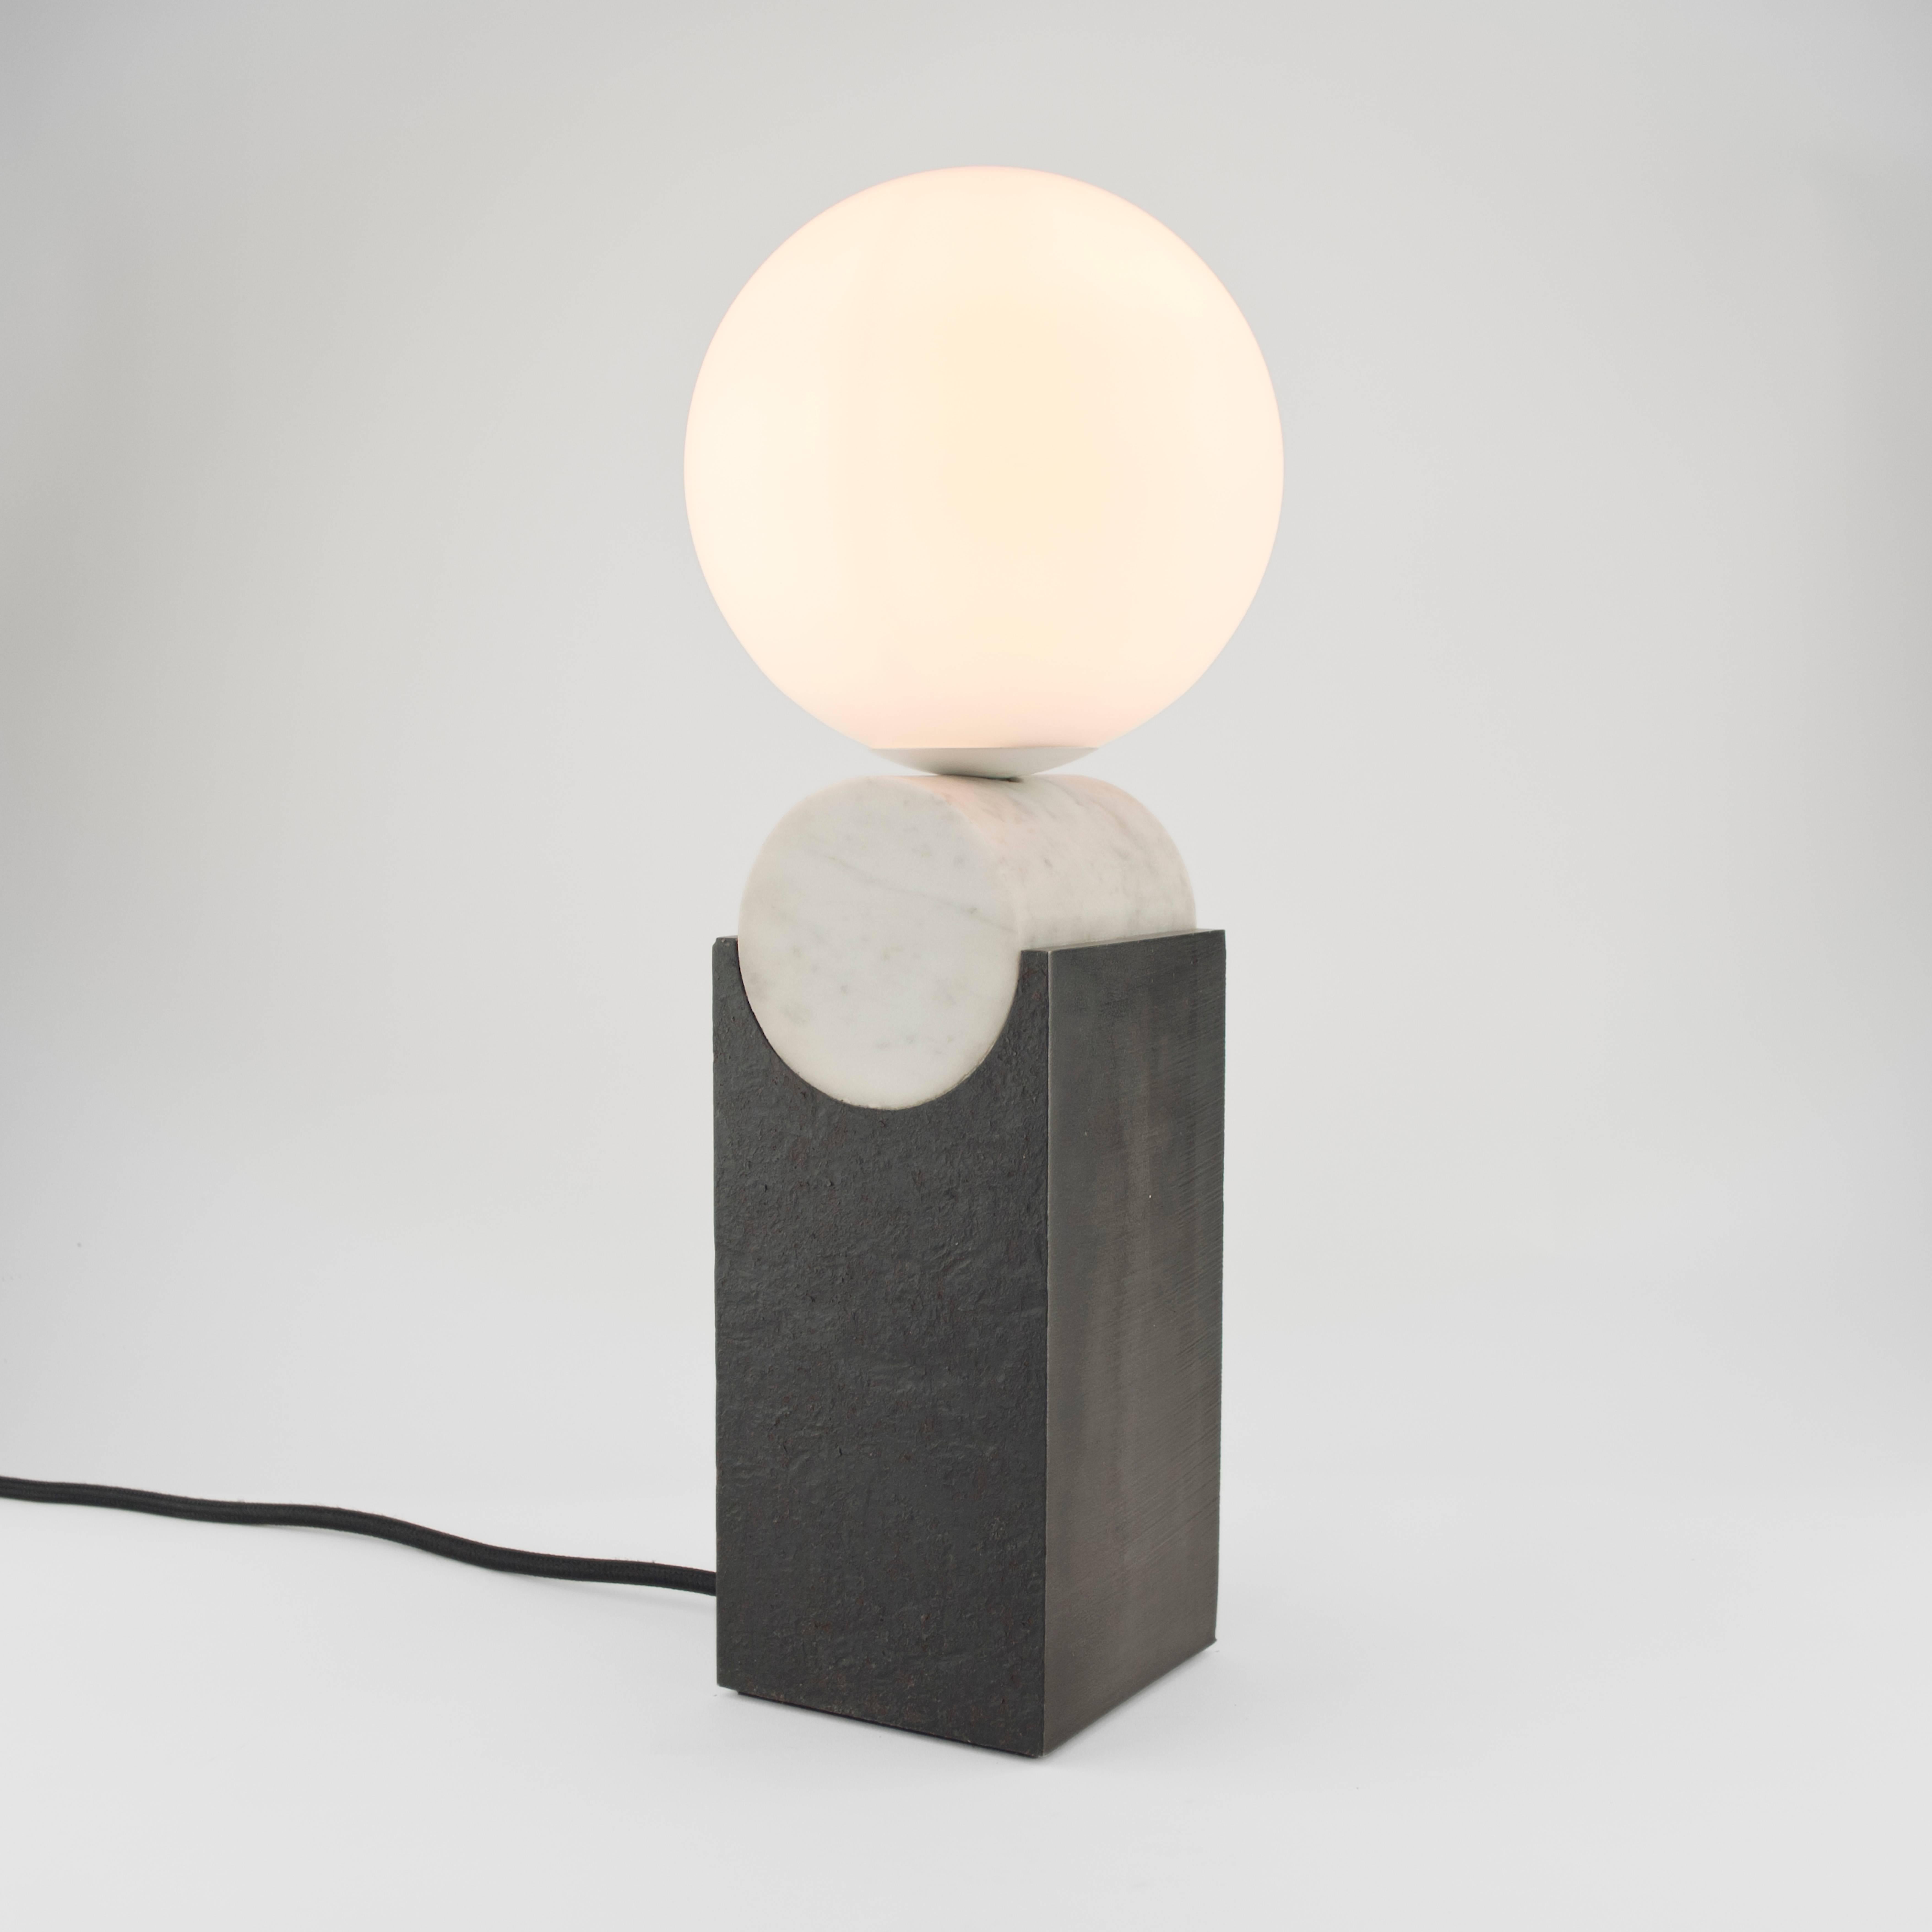 English Contemporary Monument Table Lamp Circle in Carrara Marble, Solid Steel and Glass